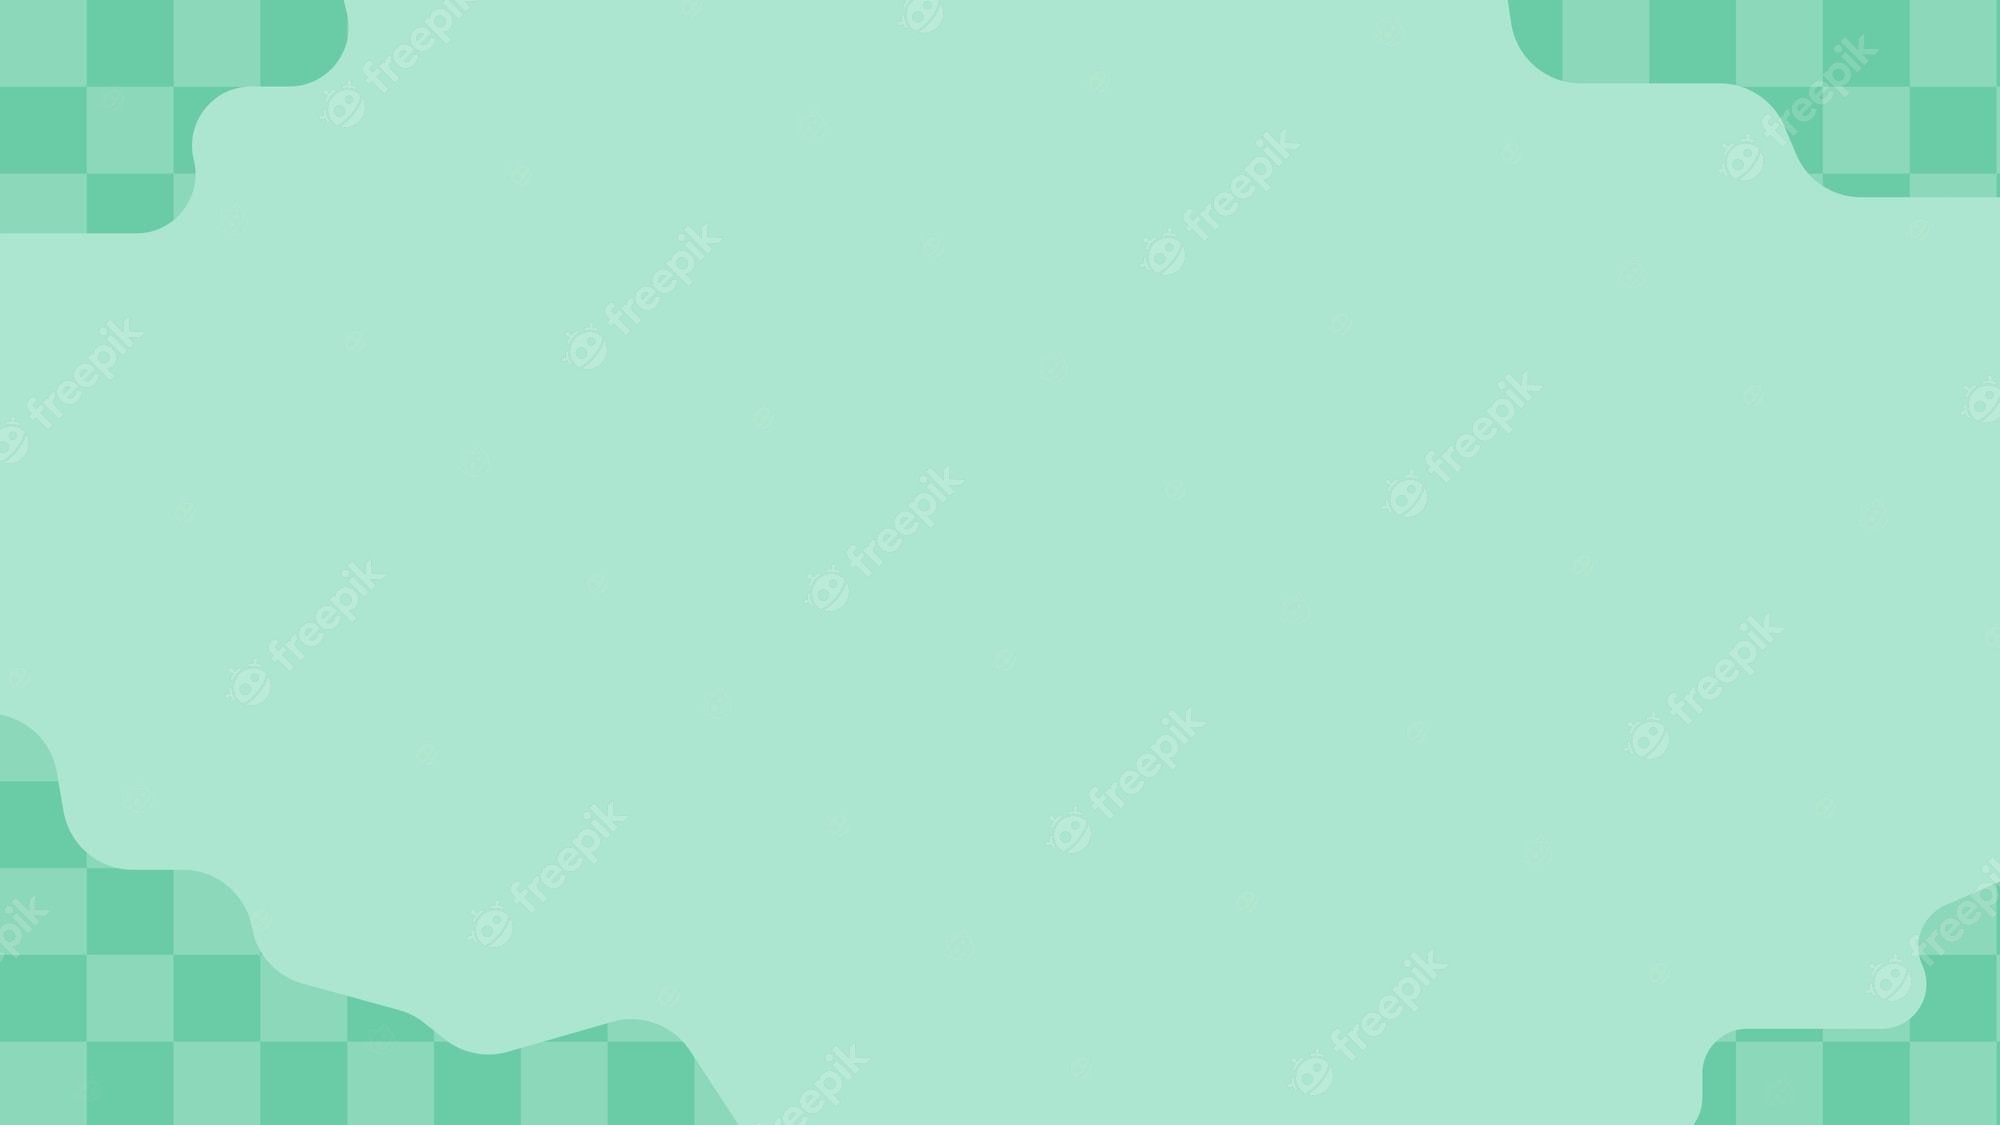 A green square with checkered background - Mint green